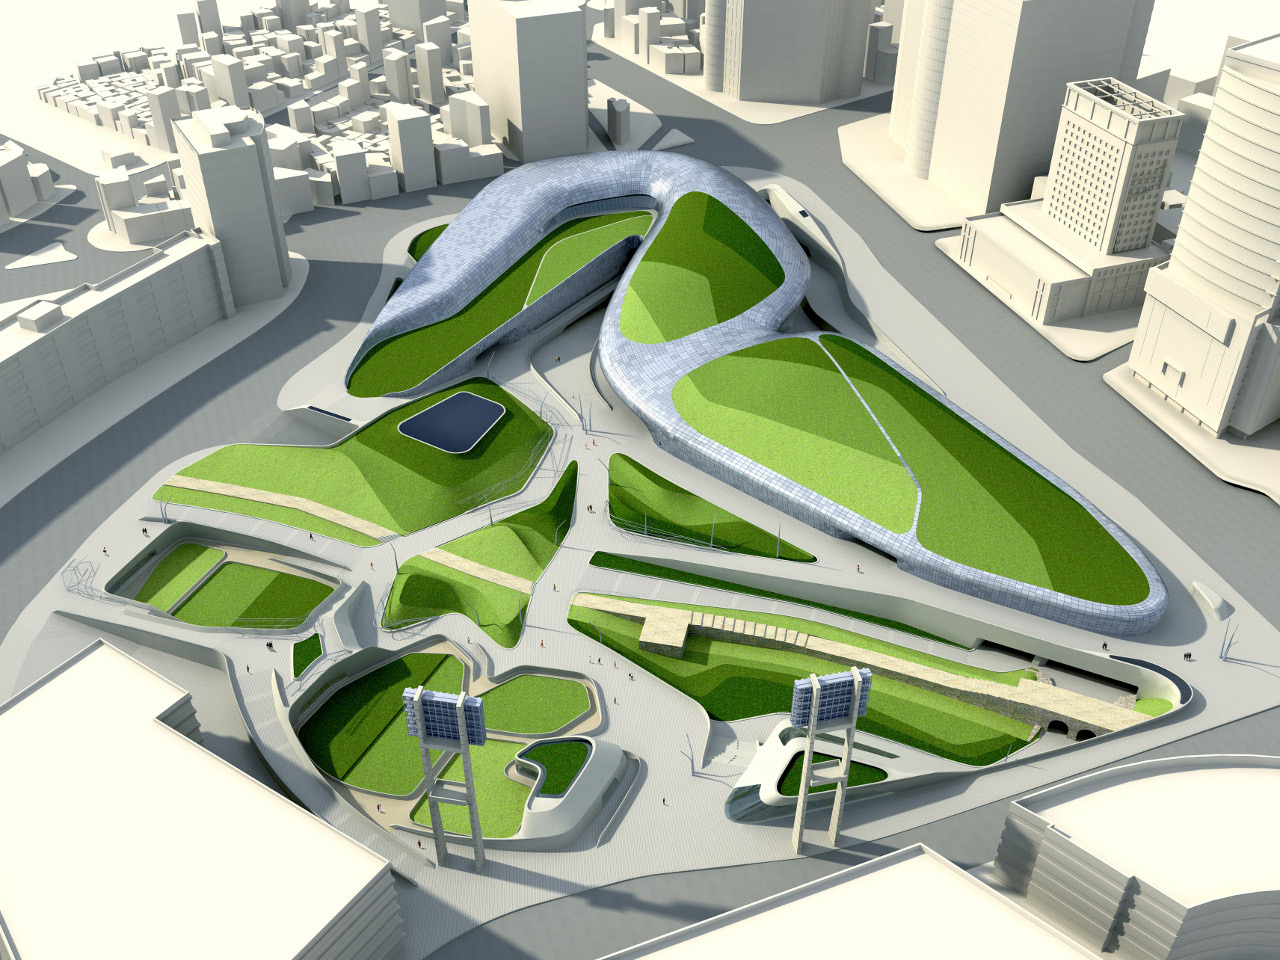 Zaha Hadid's Dongdaemun Design Park and Plaza rendering of the green roof